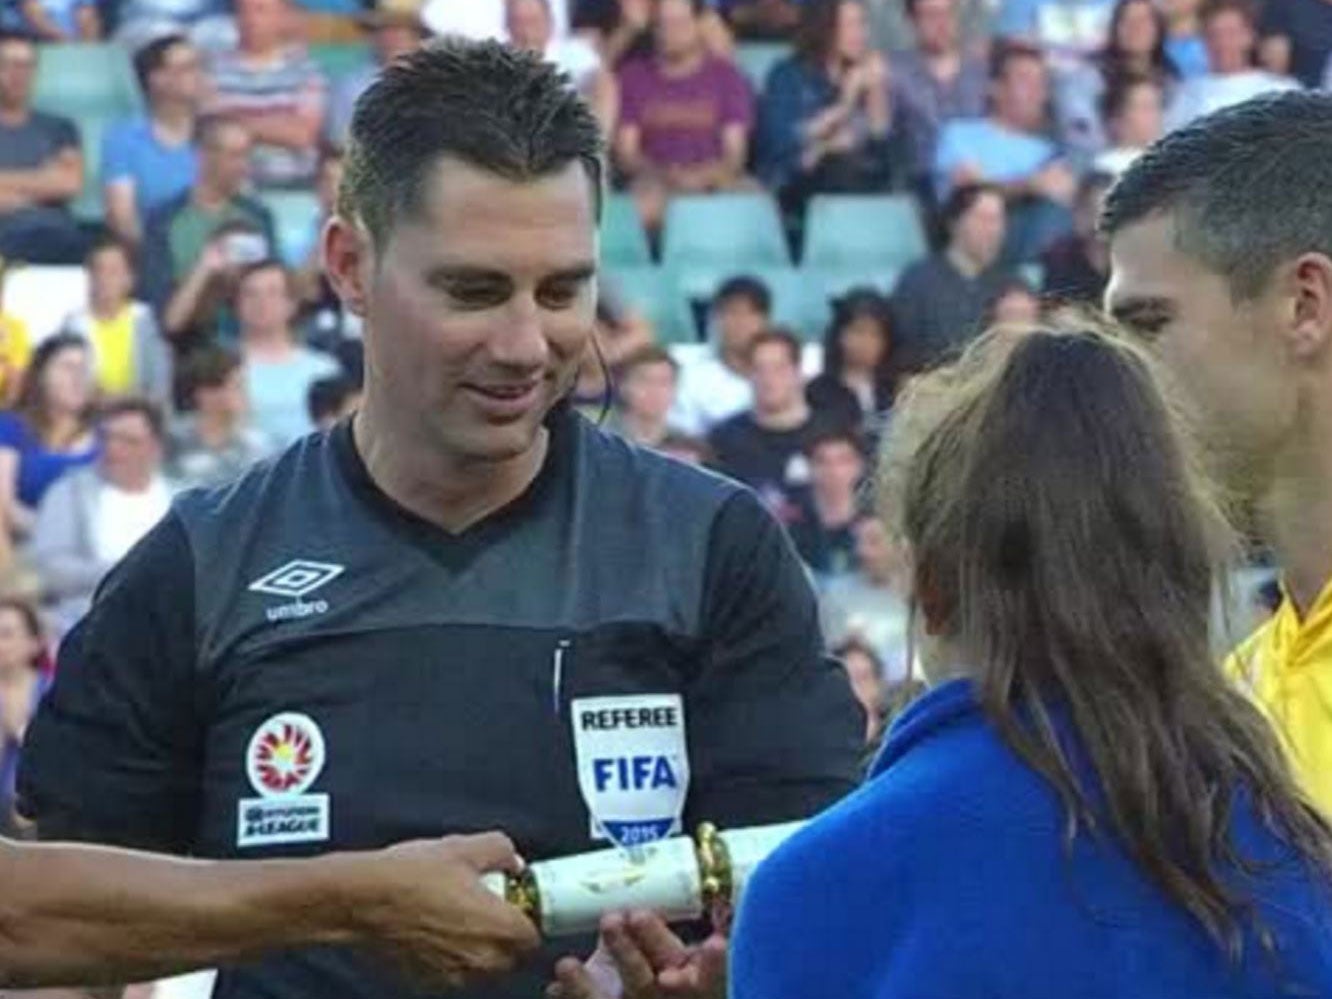 A-League referee Benjamin Williams oversees the cracker pull